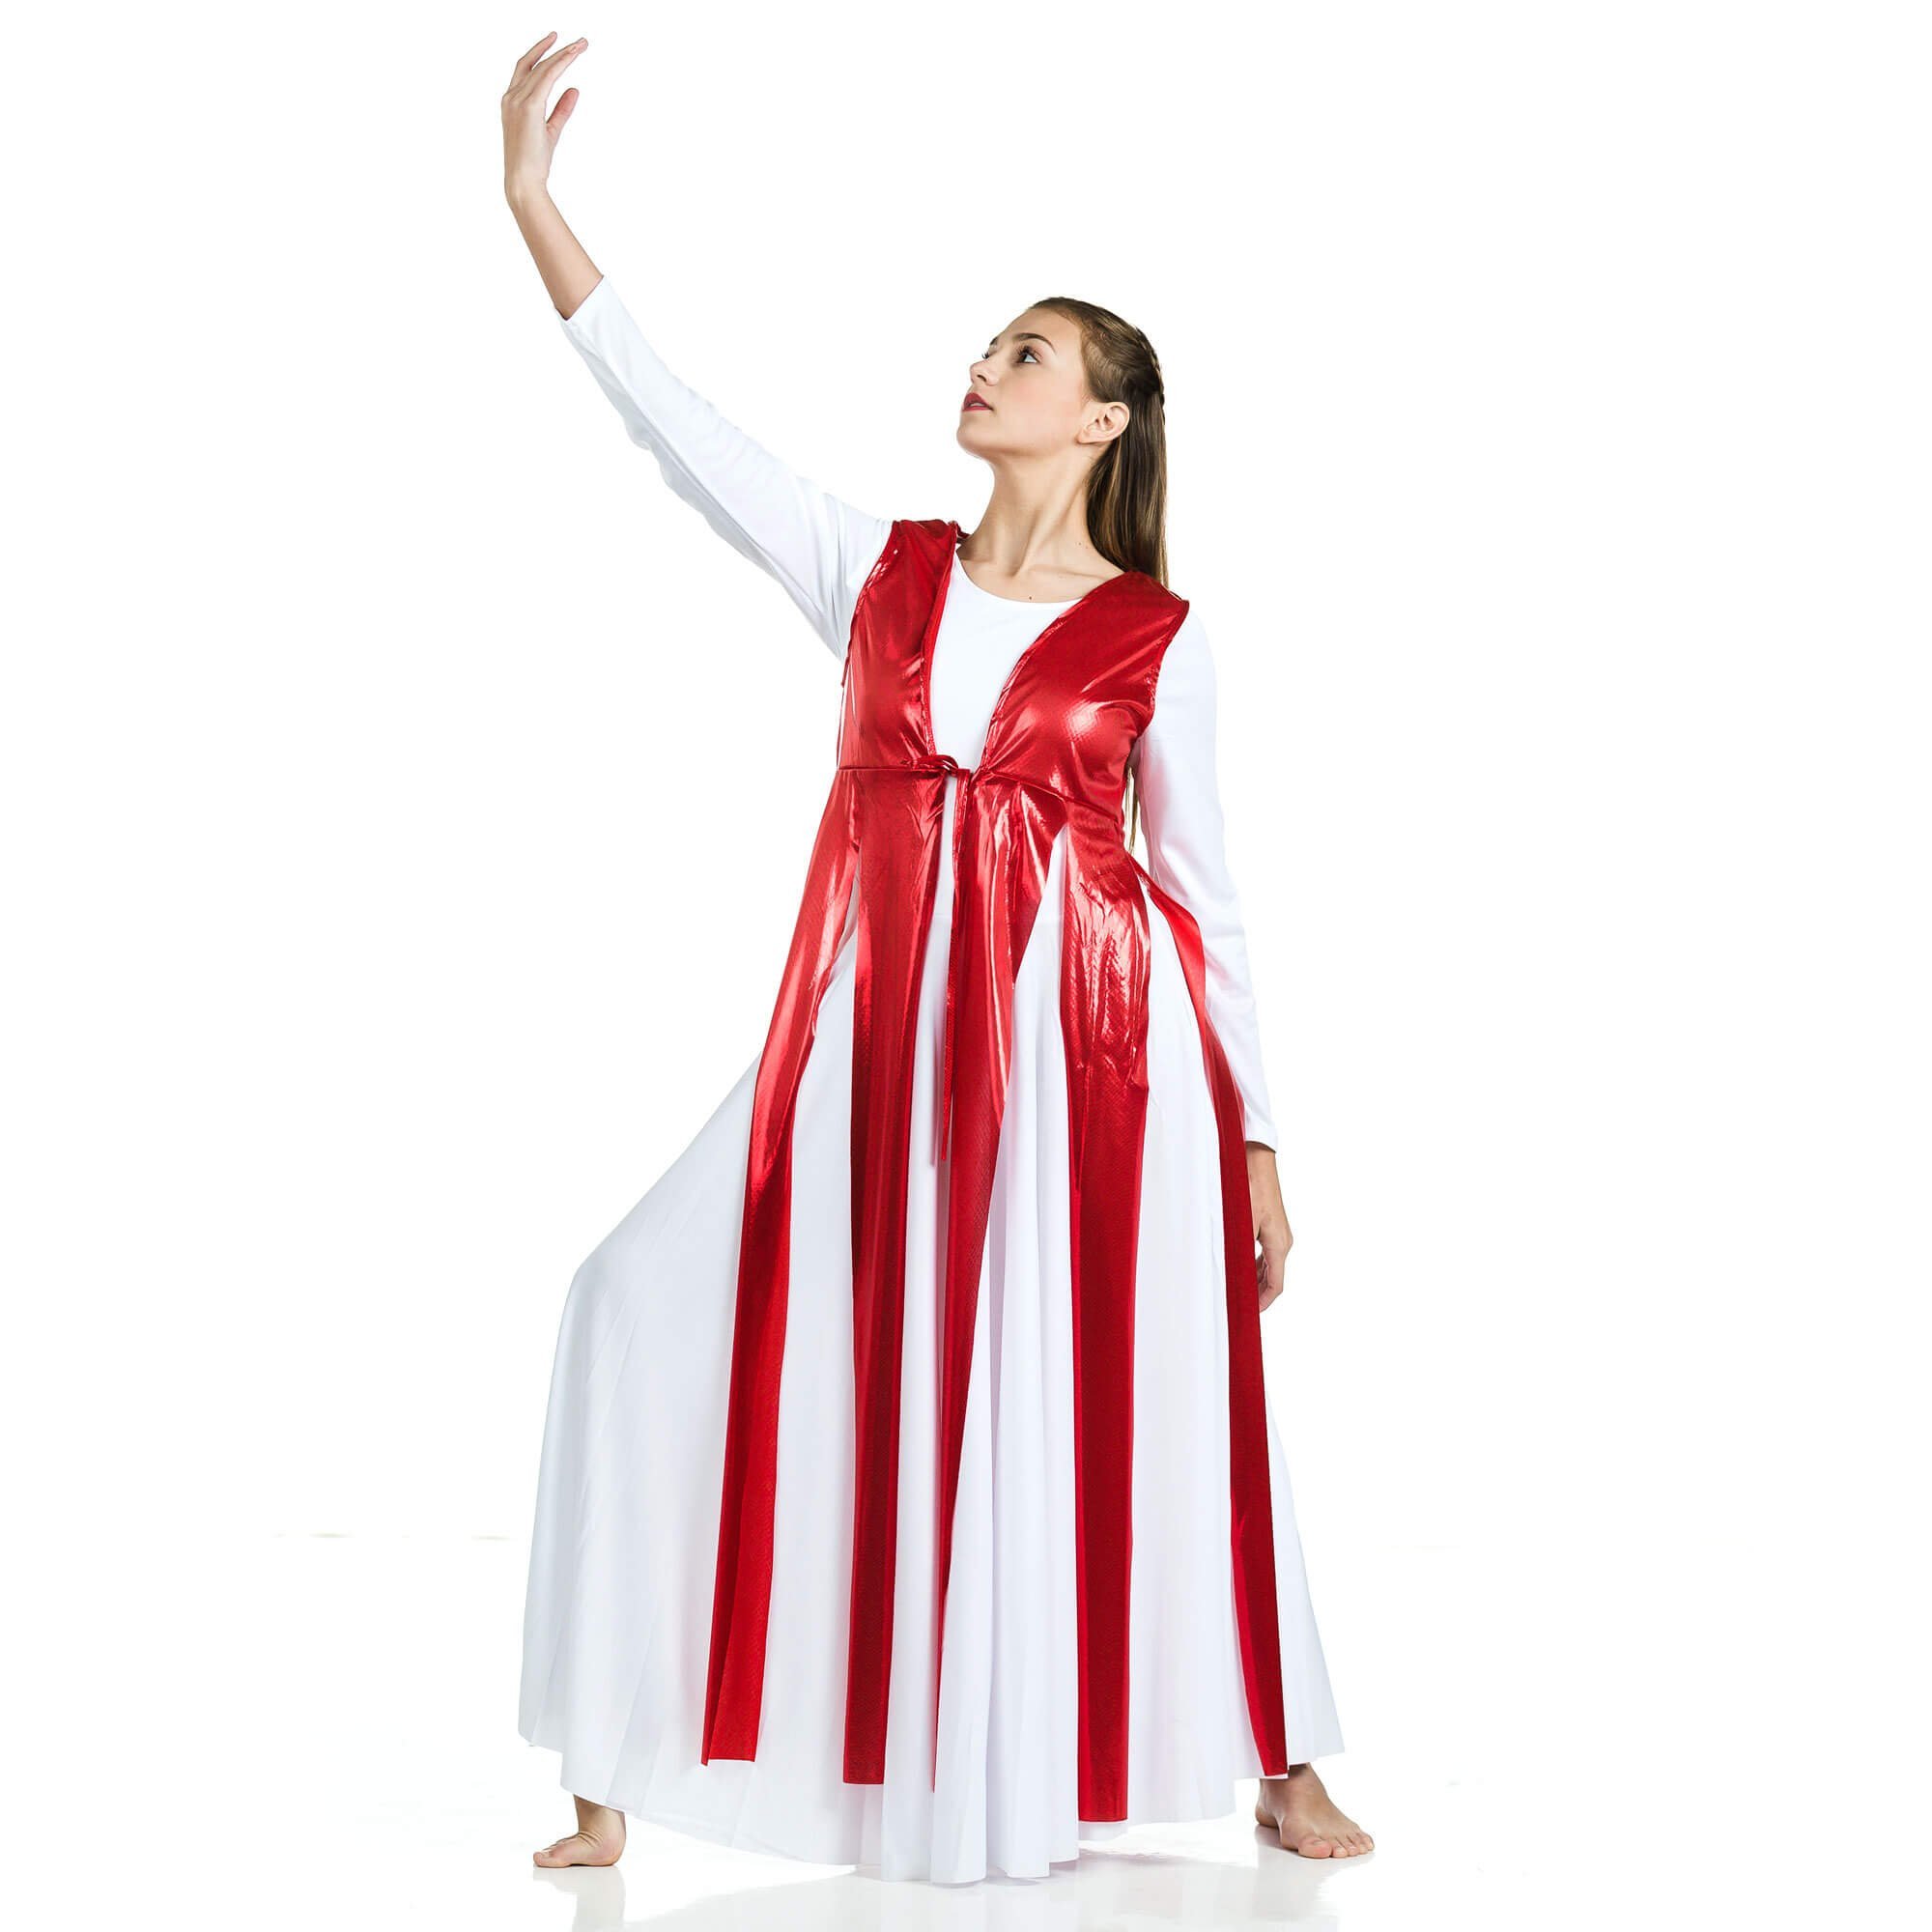 Danzcue Praise Dance Metallic Streamer Tunic (dress not included) - Click Image to Close